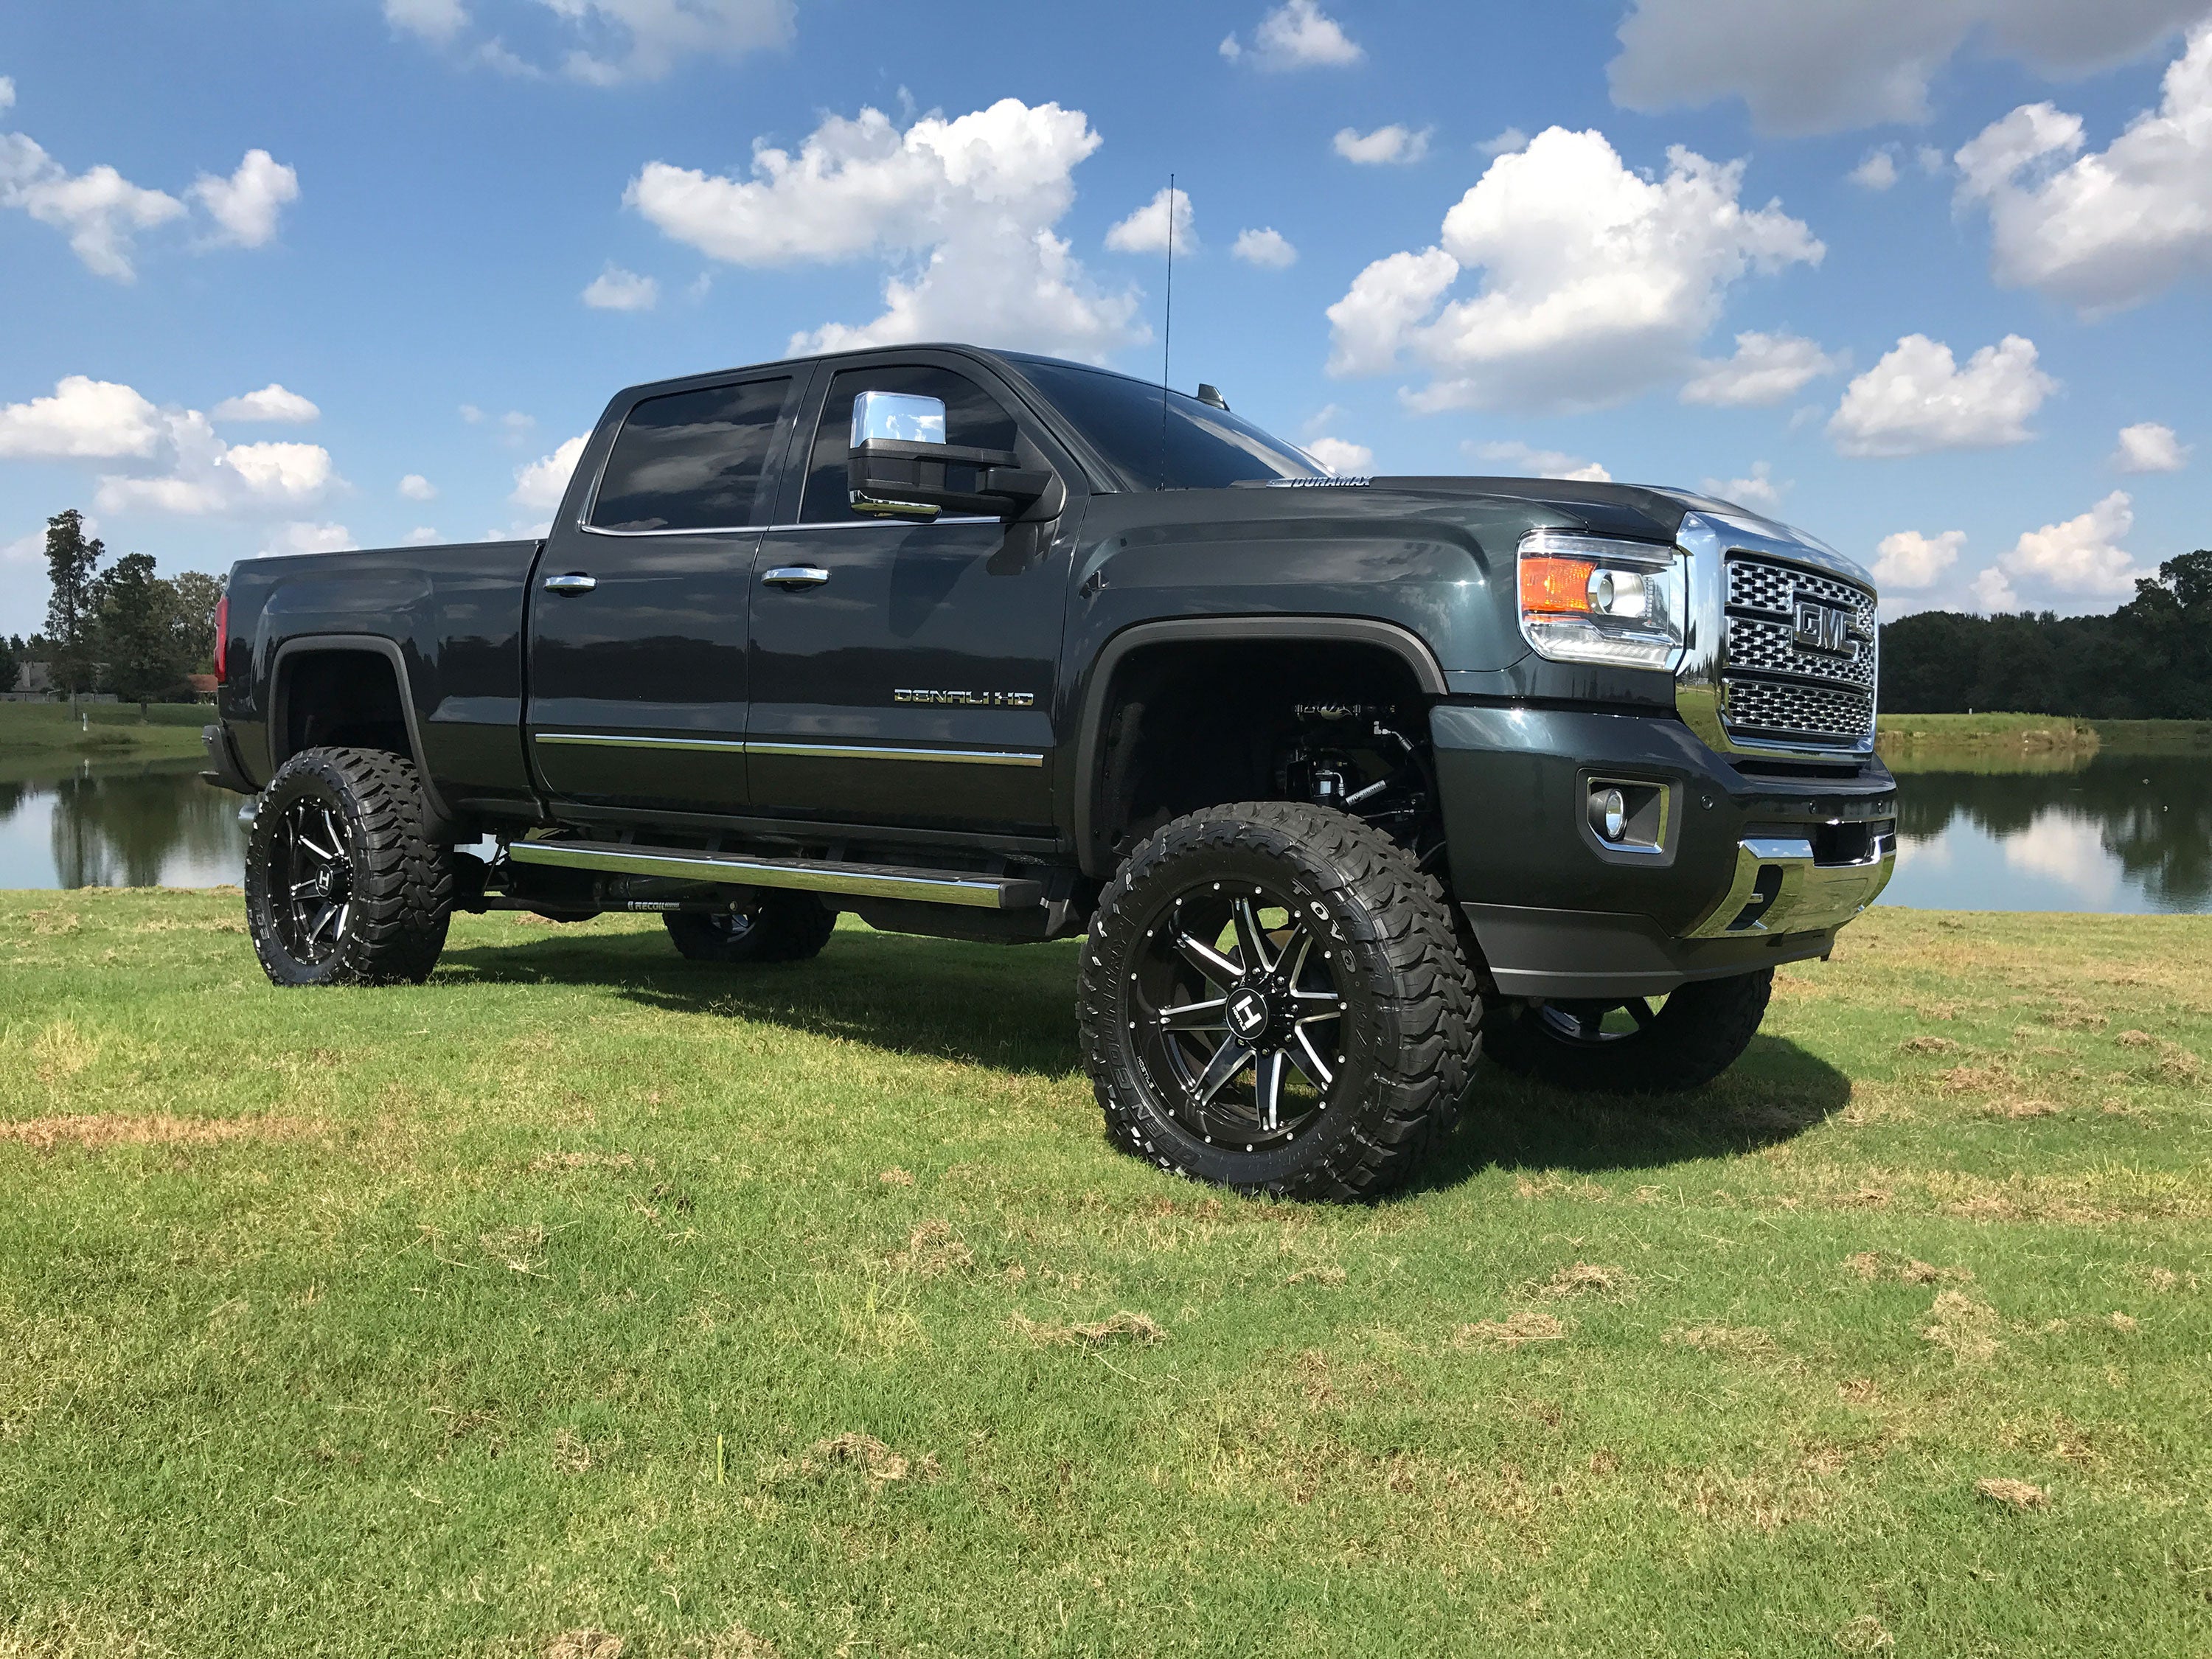 BDS 6.5" Lift Kit for 2011-2019 Chevy Silverado 2500 with Fox 2.5 Performance Elite Shocks - Outback Kitters